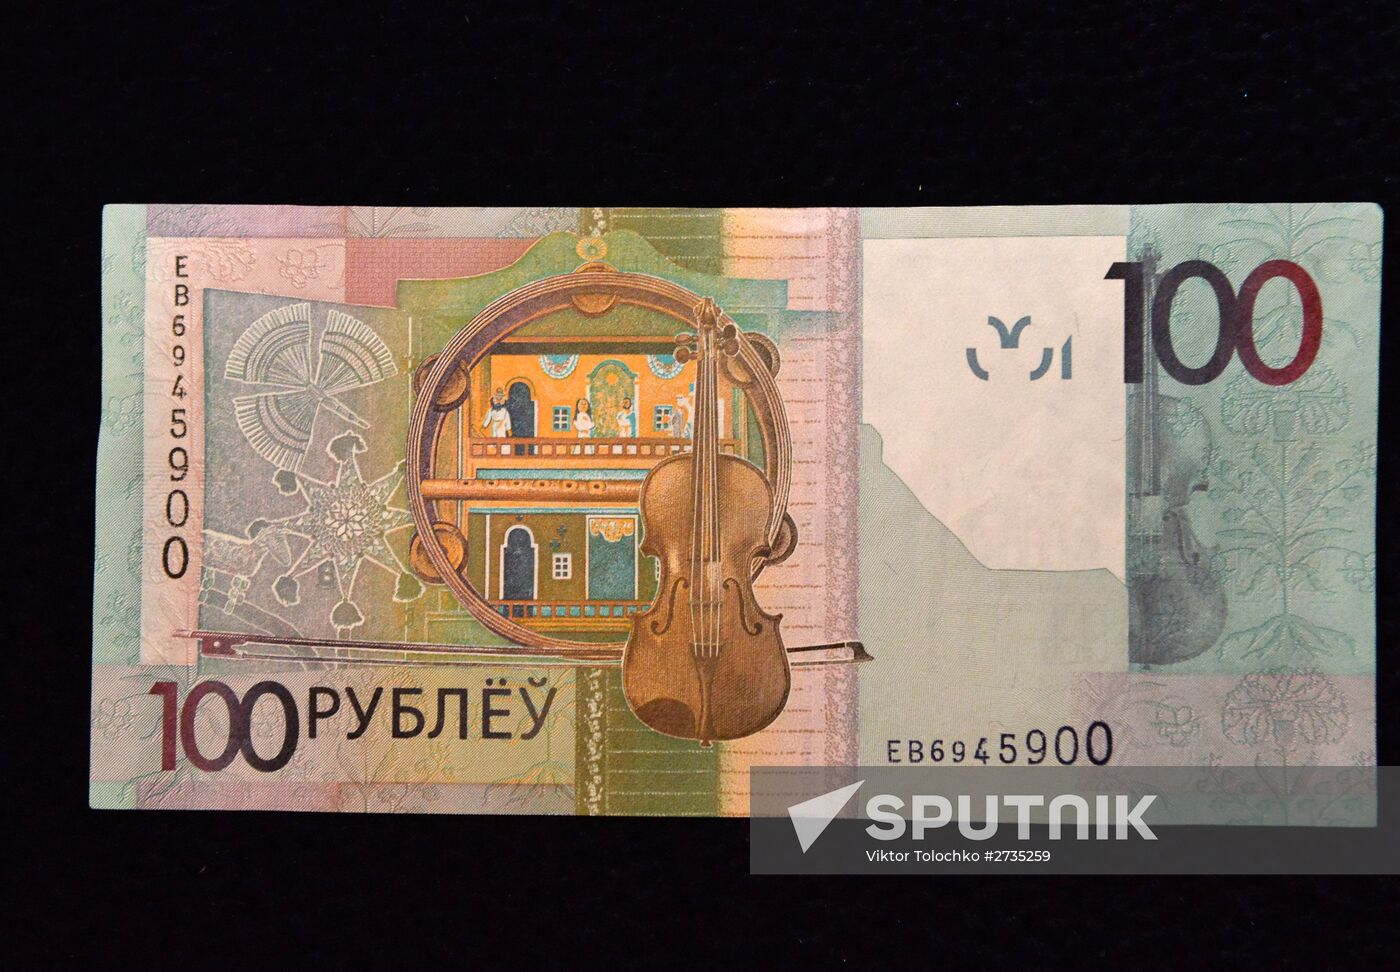 New banknotes unveiled in Minsk